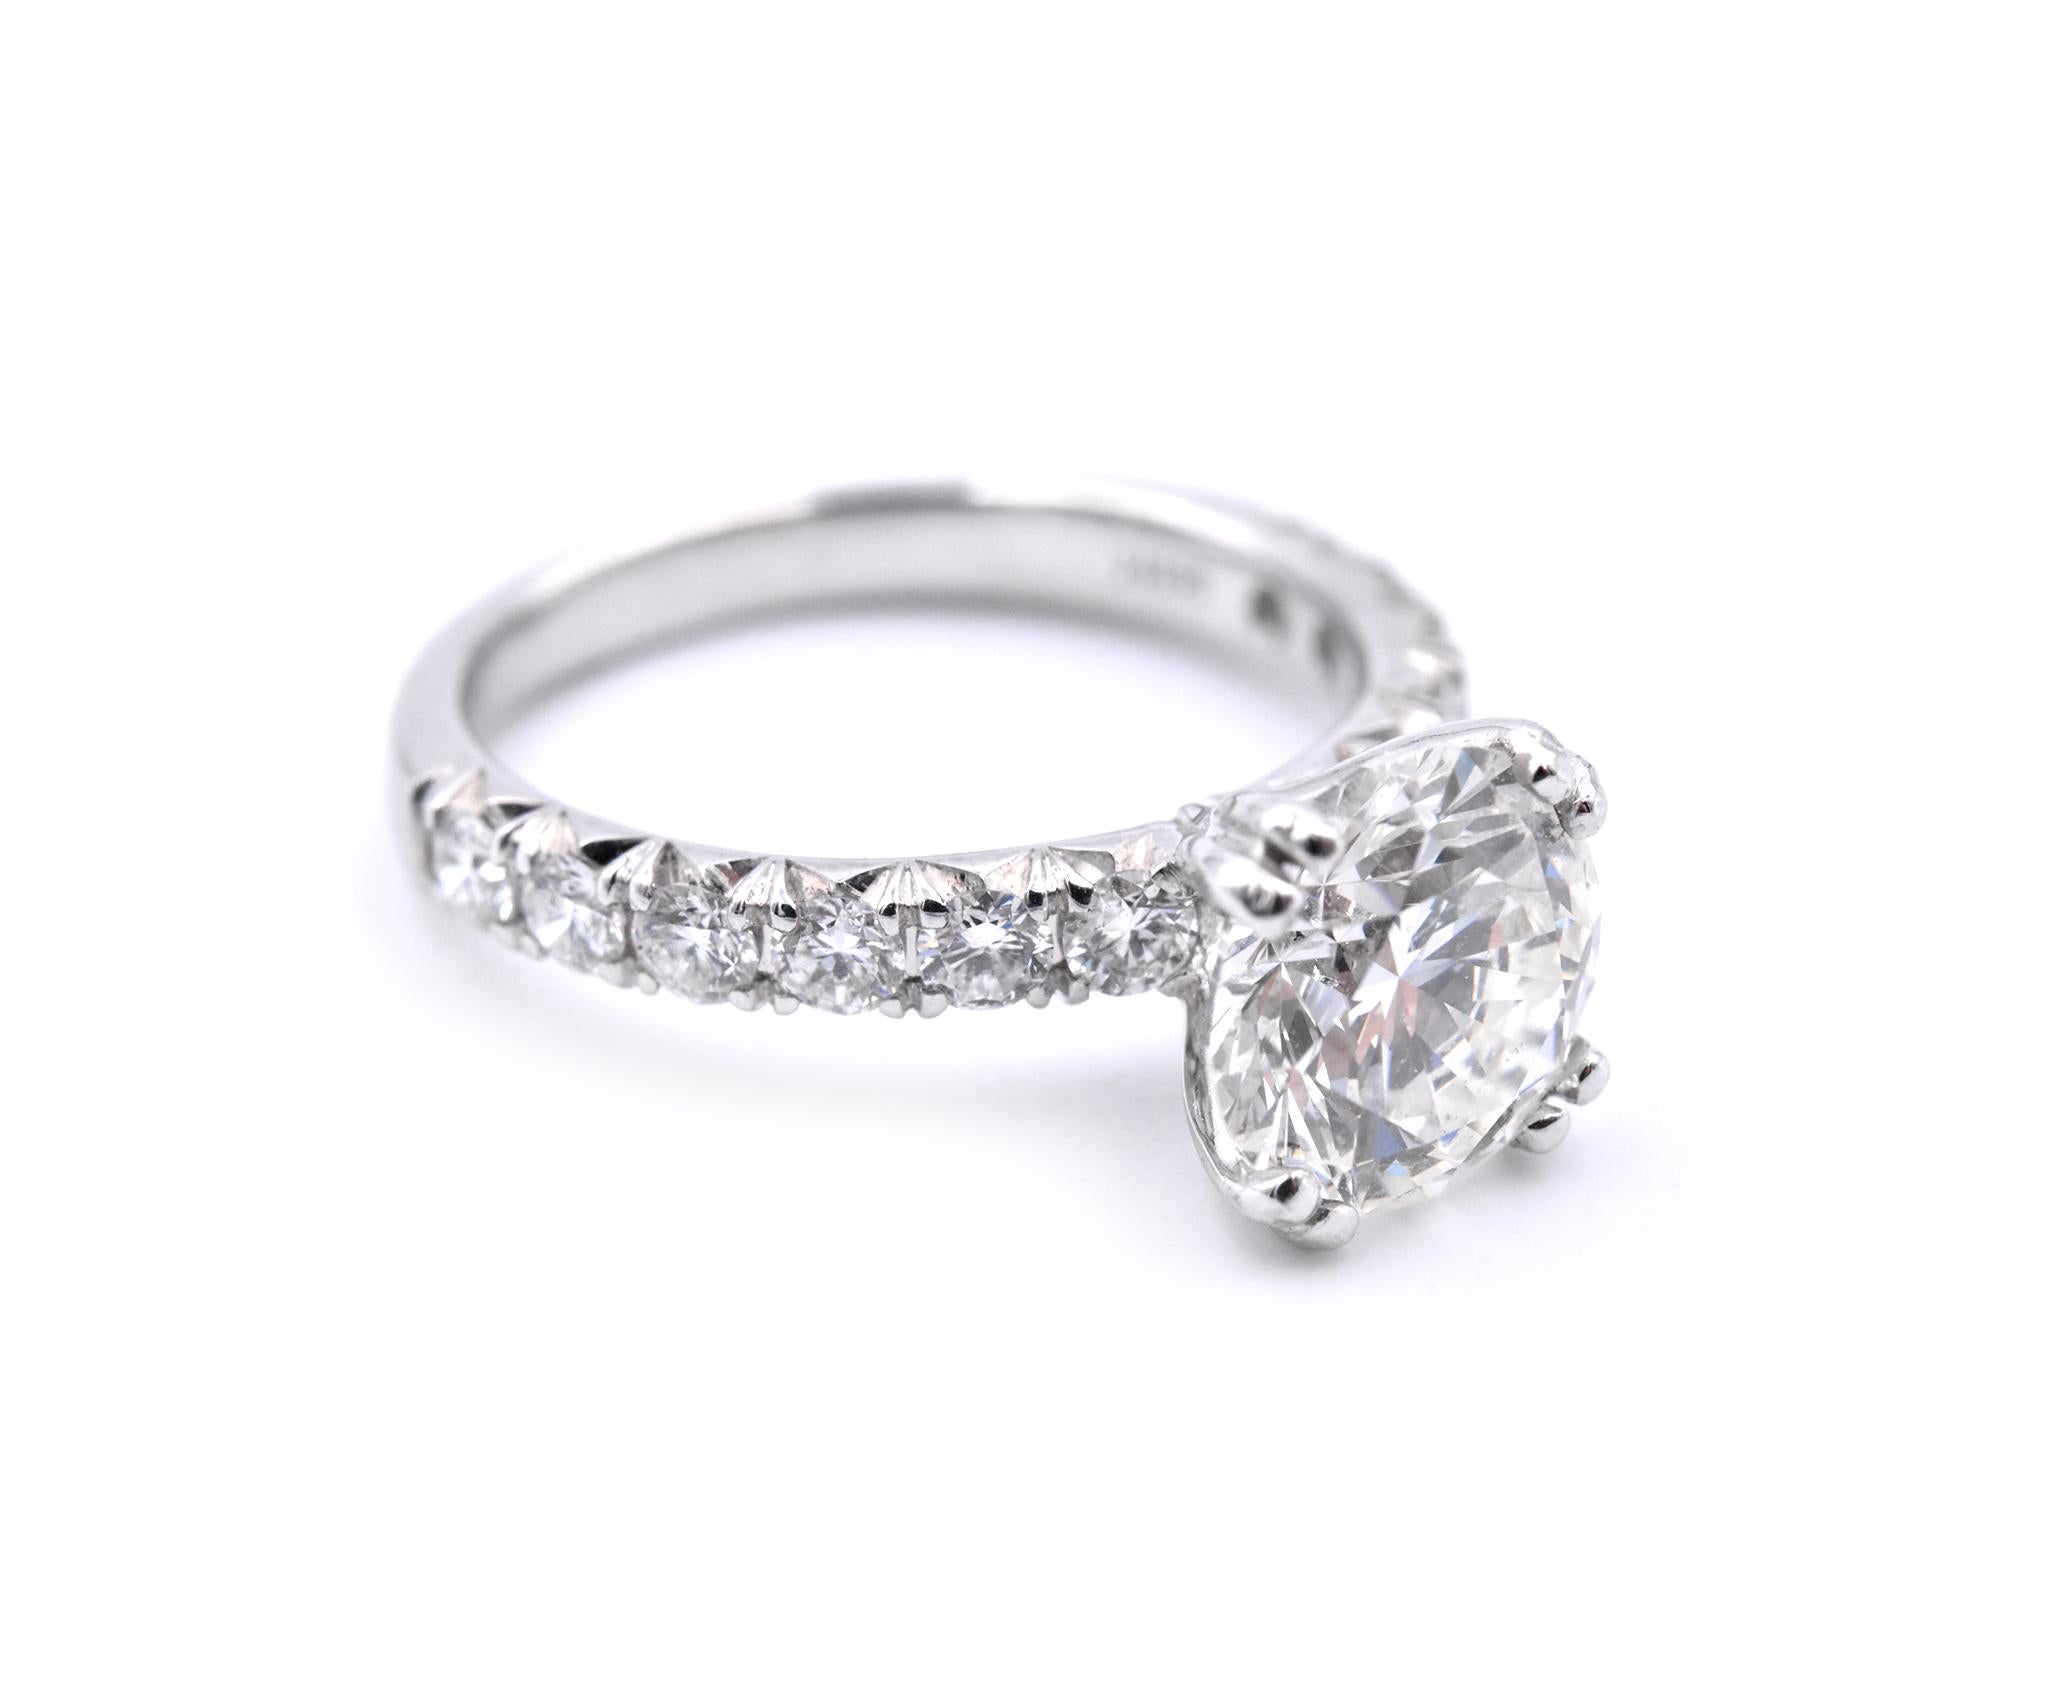 Material: 14k white gold
Center Diamond: 1 round brilliant cut = 2.40ct
Color: J
Clarity: SI2
GIA: 2116304117
Accent Diamonds: 12 round brilliant cuts = .82cttw
Color: G
Clarity: VS
Ring Size: 7 (please allow up to 2 additional business days for